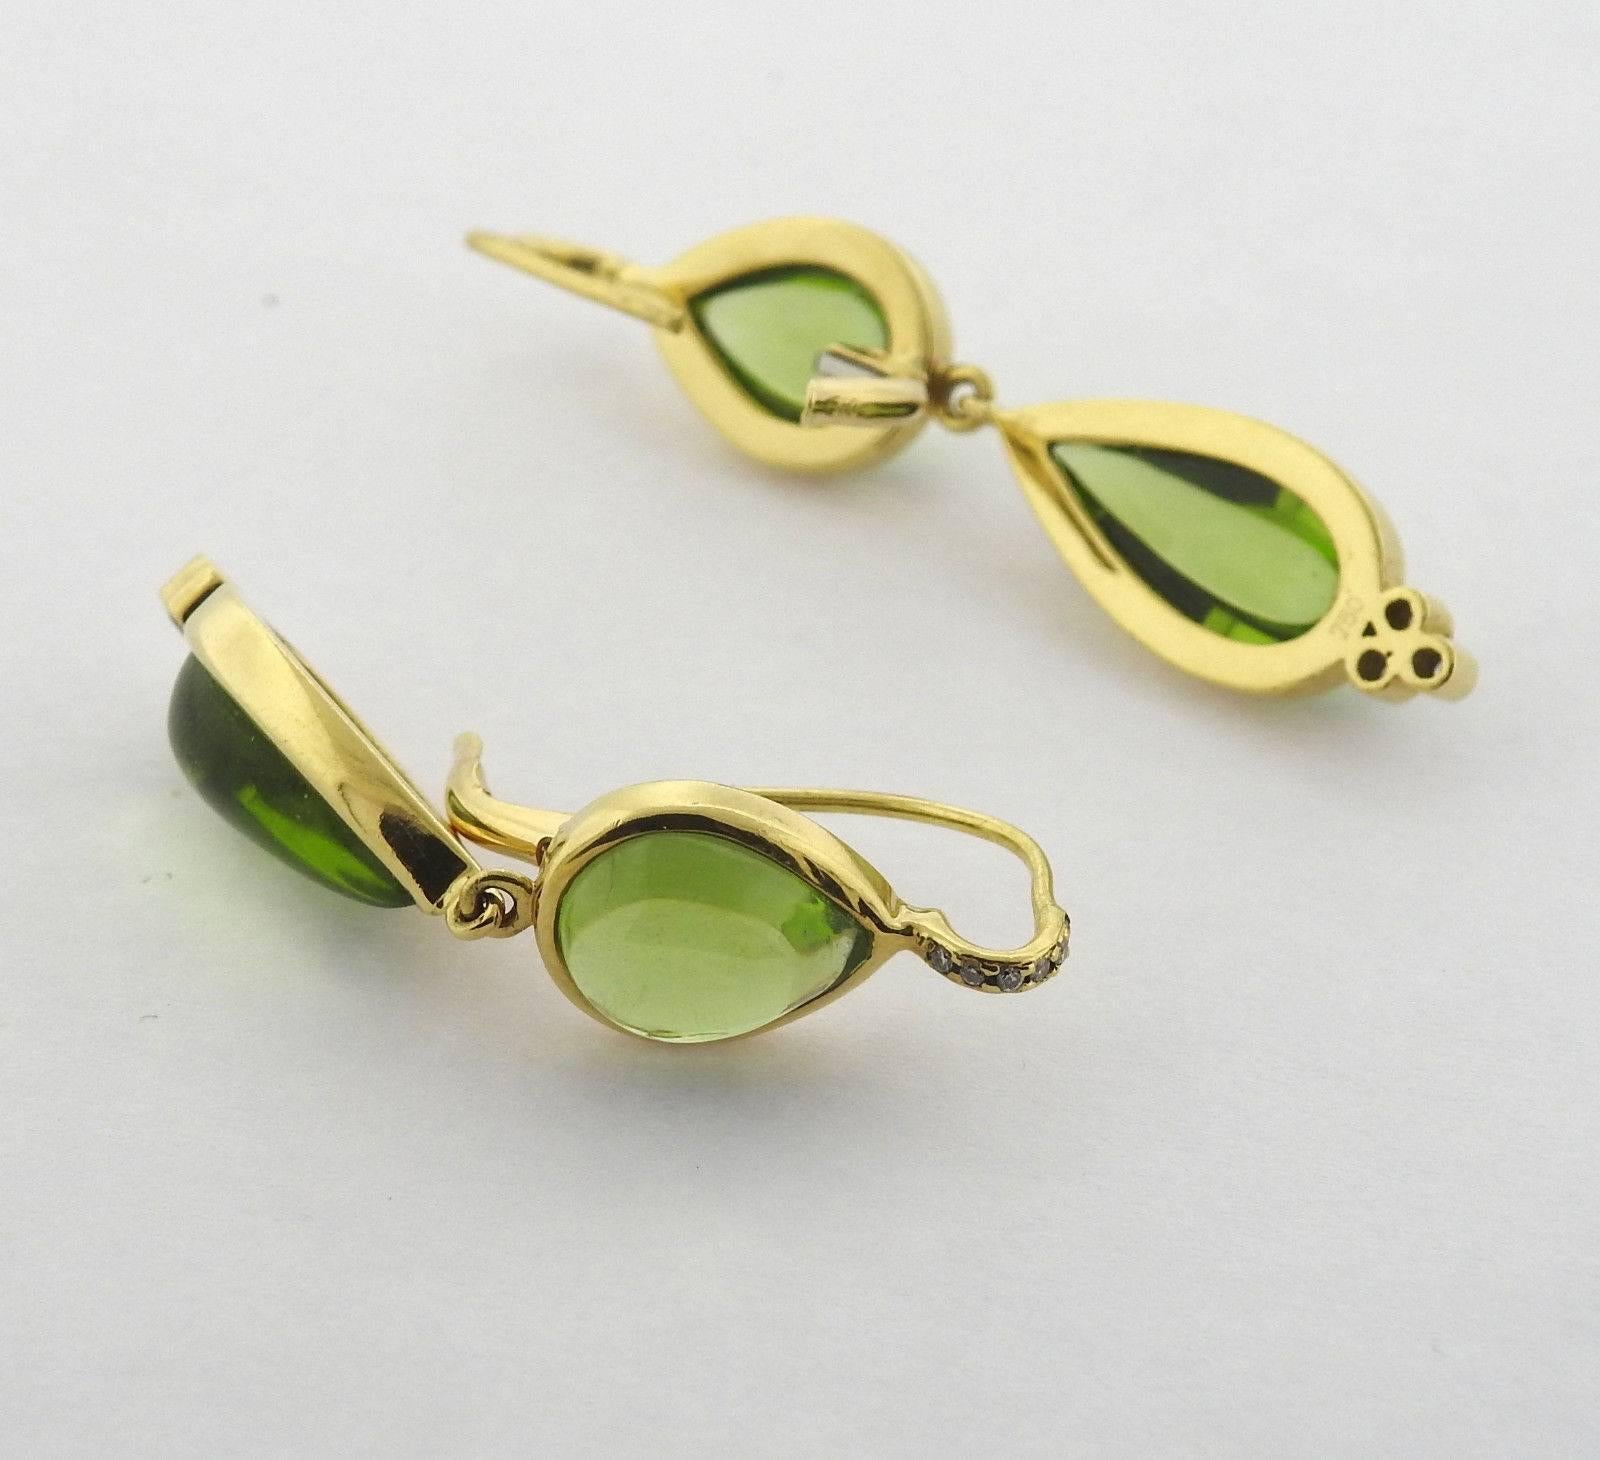 A pair of 18k yellow gold earrings set with peridot and approximately 0.15ctw of G/VS diamonds.  The earrings measure 45mm x 10mm and weigh 10.5 grams.  Marked with Temple Hallmarks, 750.  The current retail is $6900.